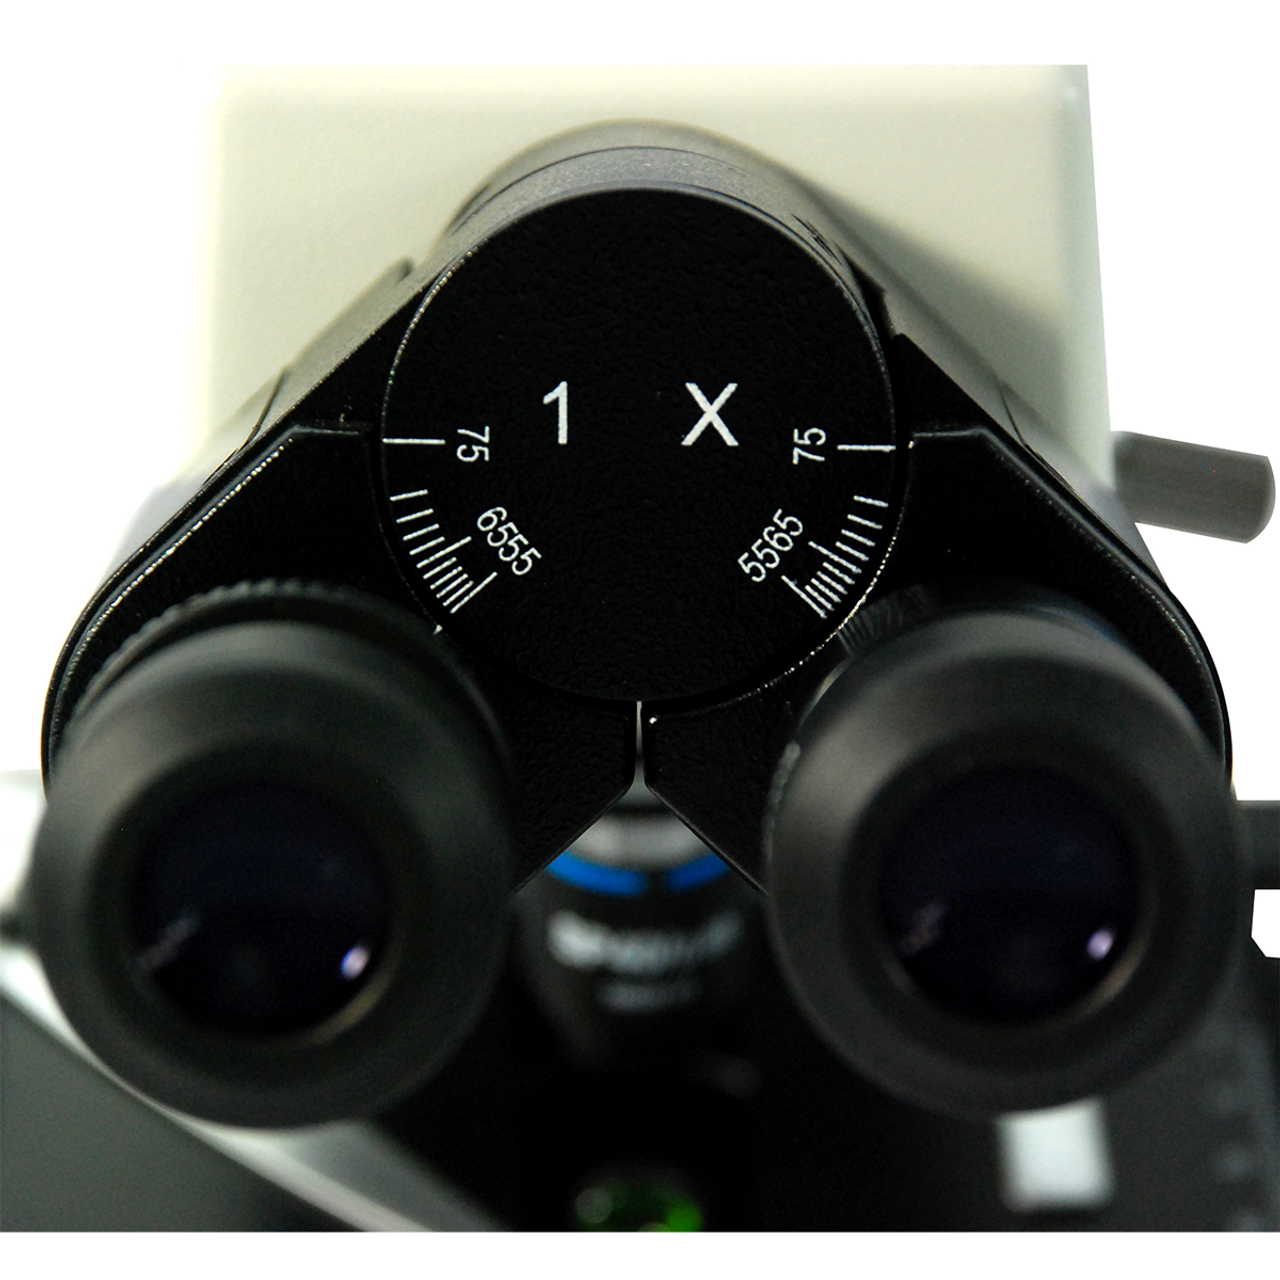 LED Lighted Magnifier, 3.5 2.75 x glass lens, Bright Triple LED ideal for  reading small print and detailed inspection